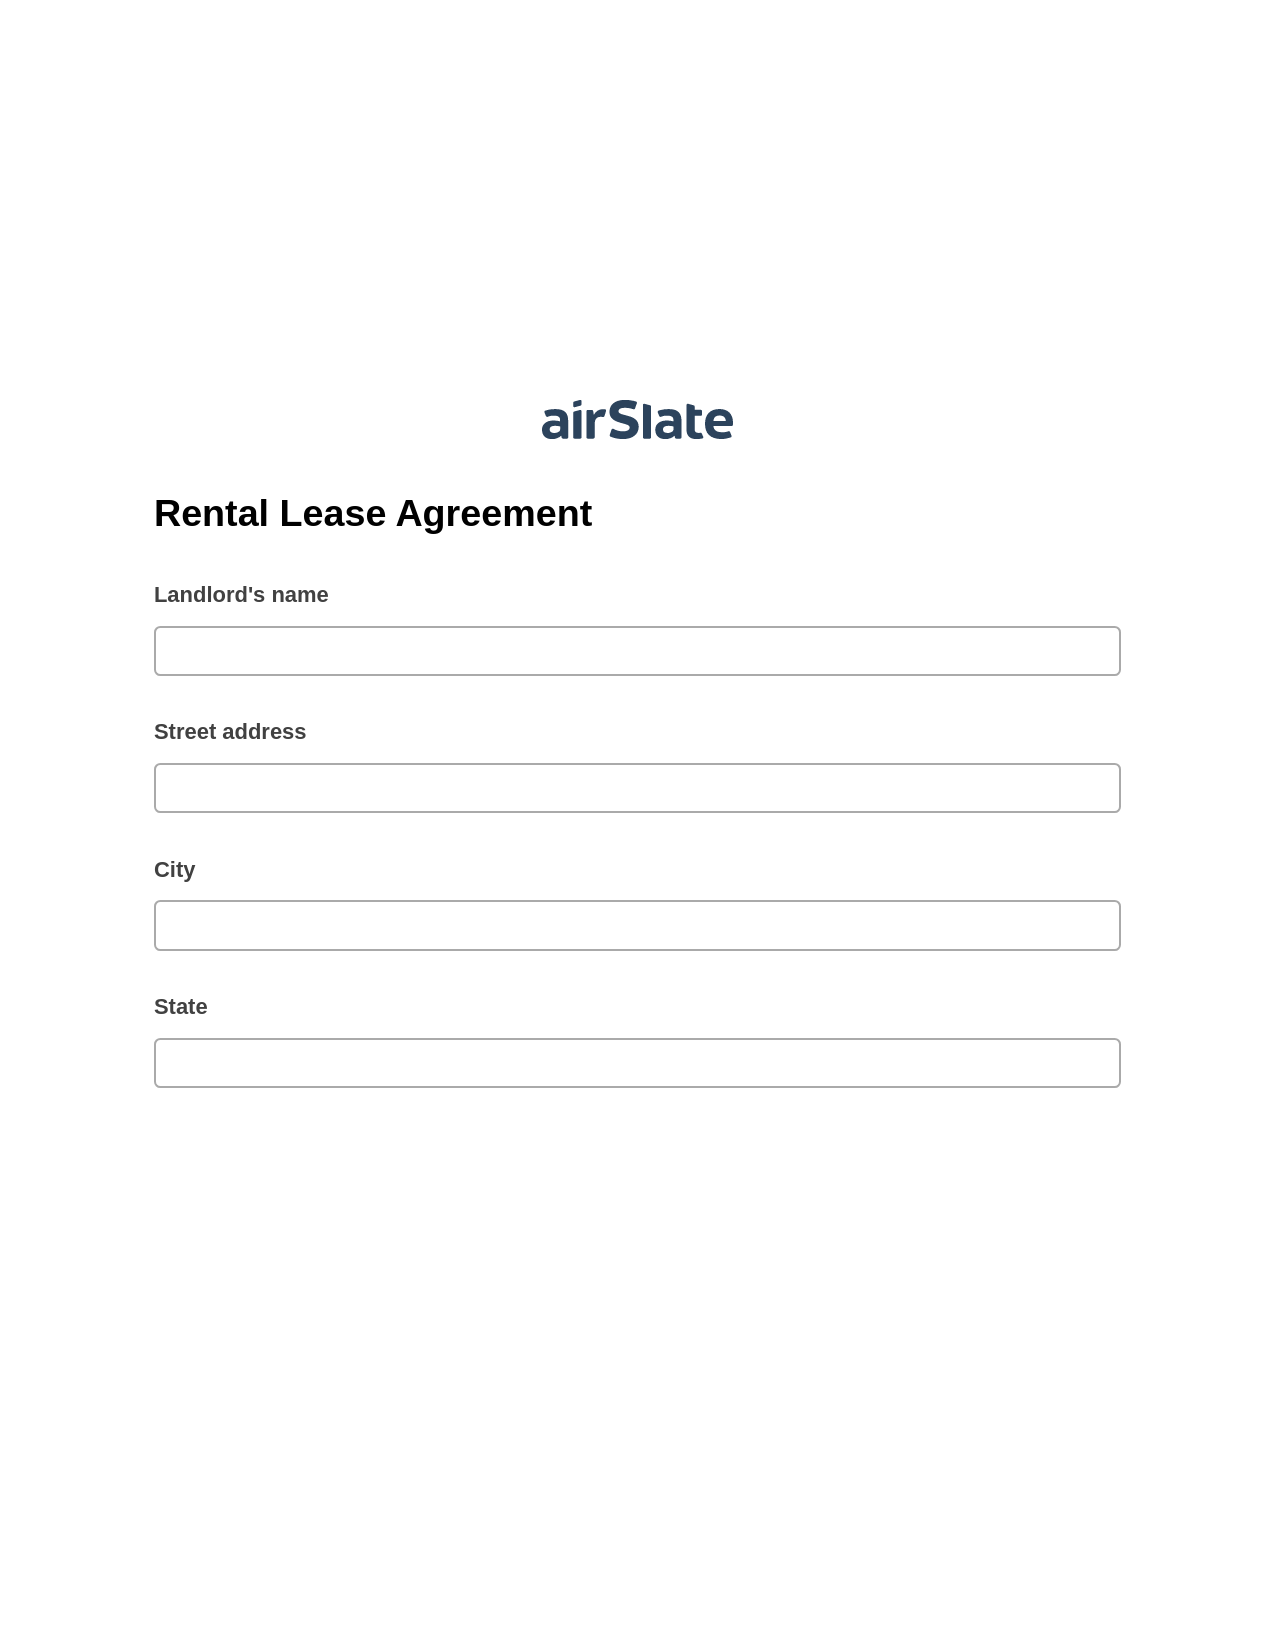 Multirole Rental Lease Agreement Pre-fill from Excel Spreadsheet Bot, Send a Slate to MS Dynamics 365 Contact Bot, Archive to SharePoint Folder Bot